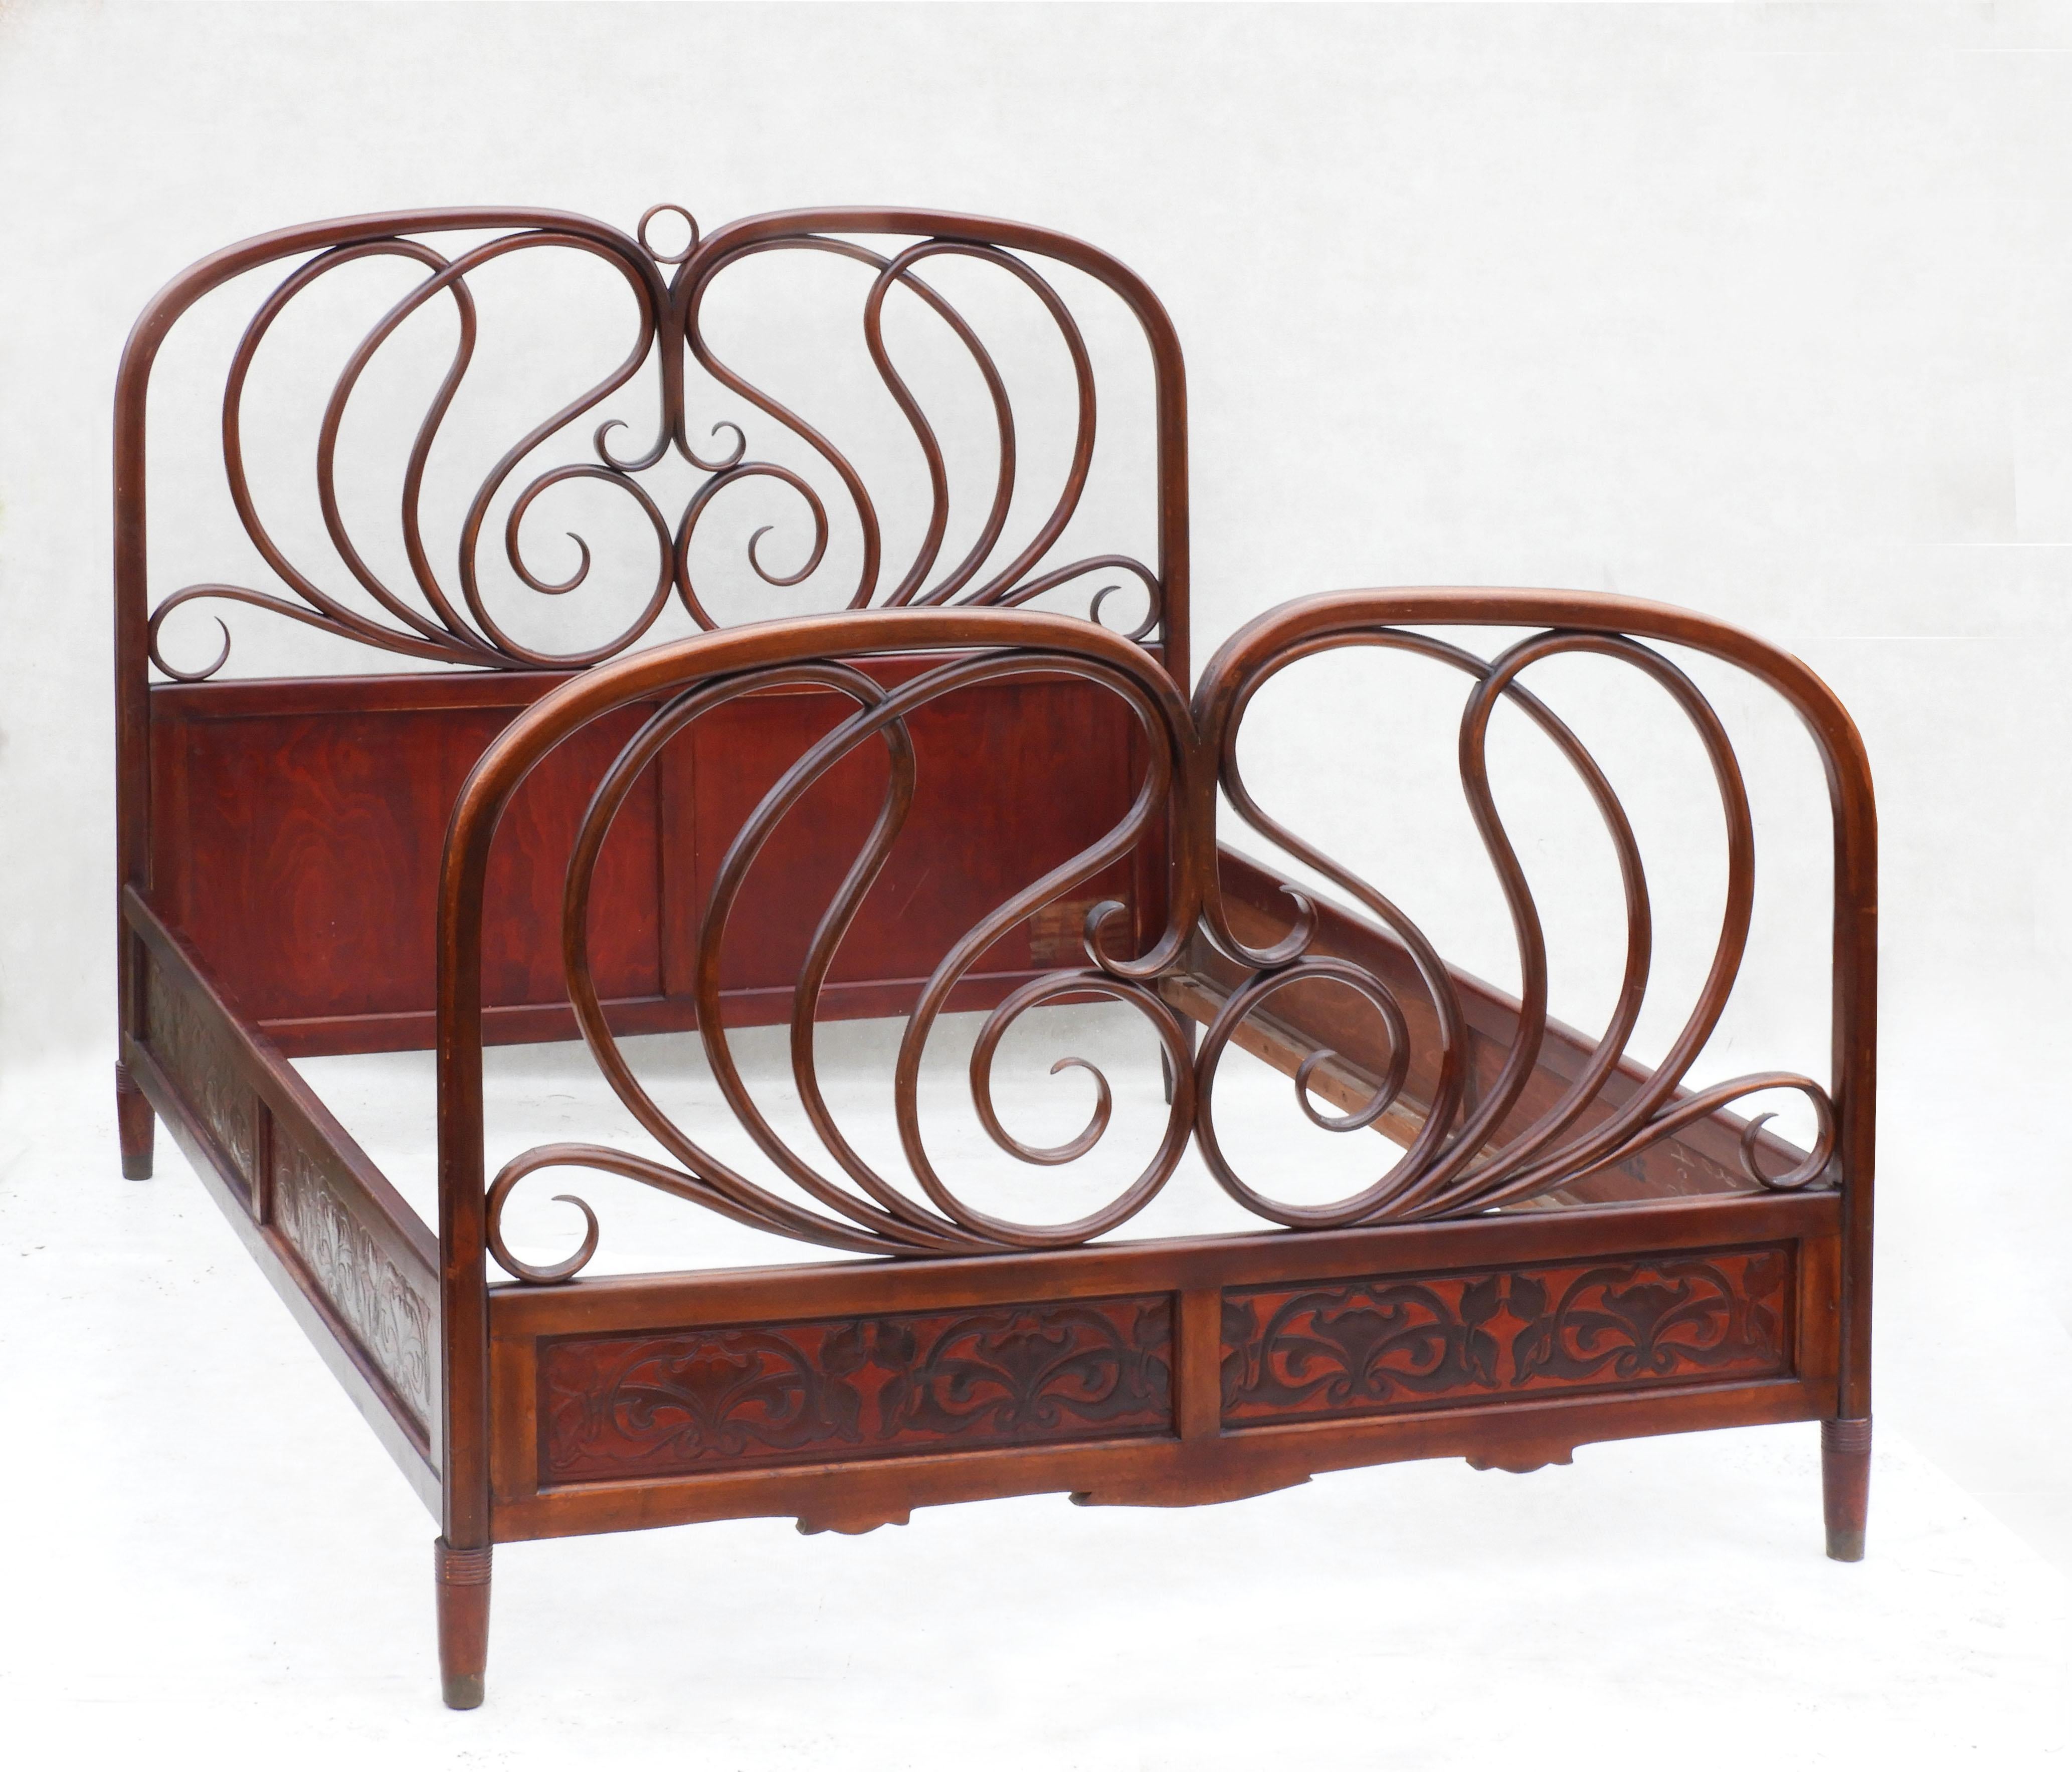 Austrian Bentwood Bed Designed by J & J Kohn C1900. 
A beautiful mahogany-stained bentwood bed frame in good original condition with nice age patina.
Dimensions: 
Headboard height: 128cm/50.39in 
Footboard height: 100cm/39.37in 
Length: